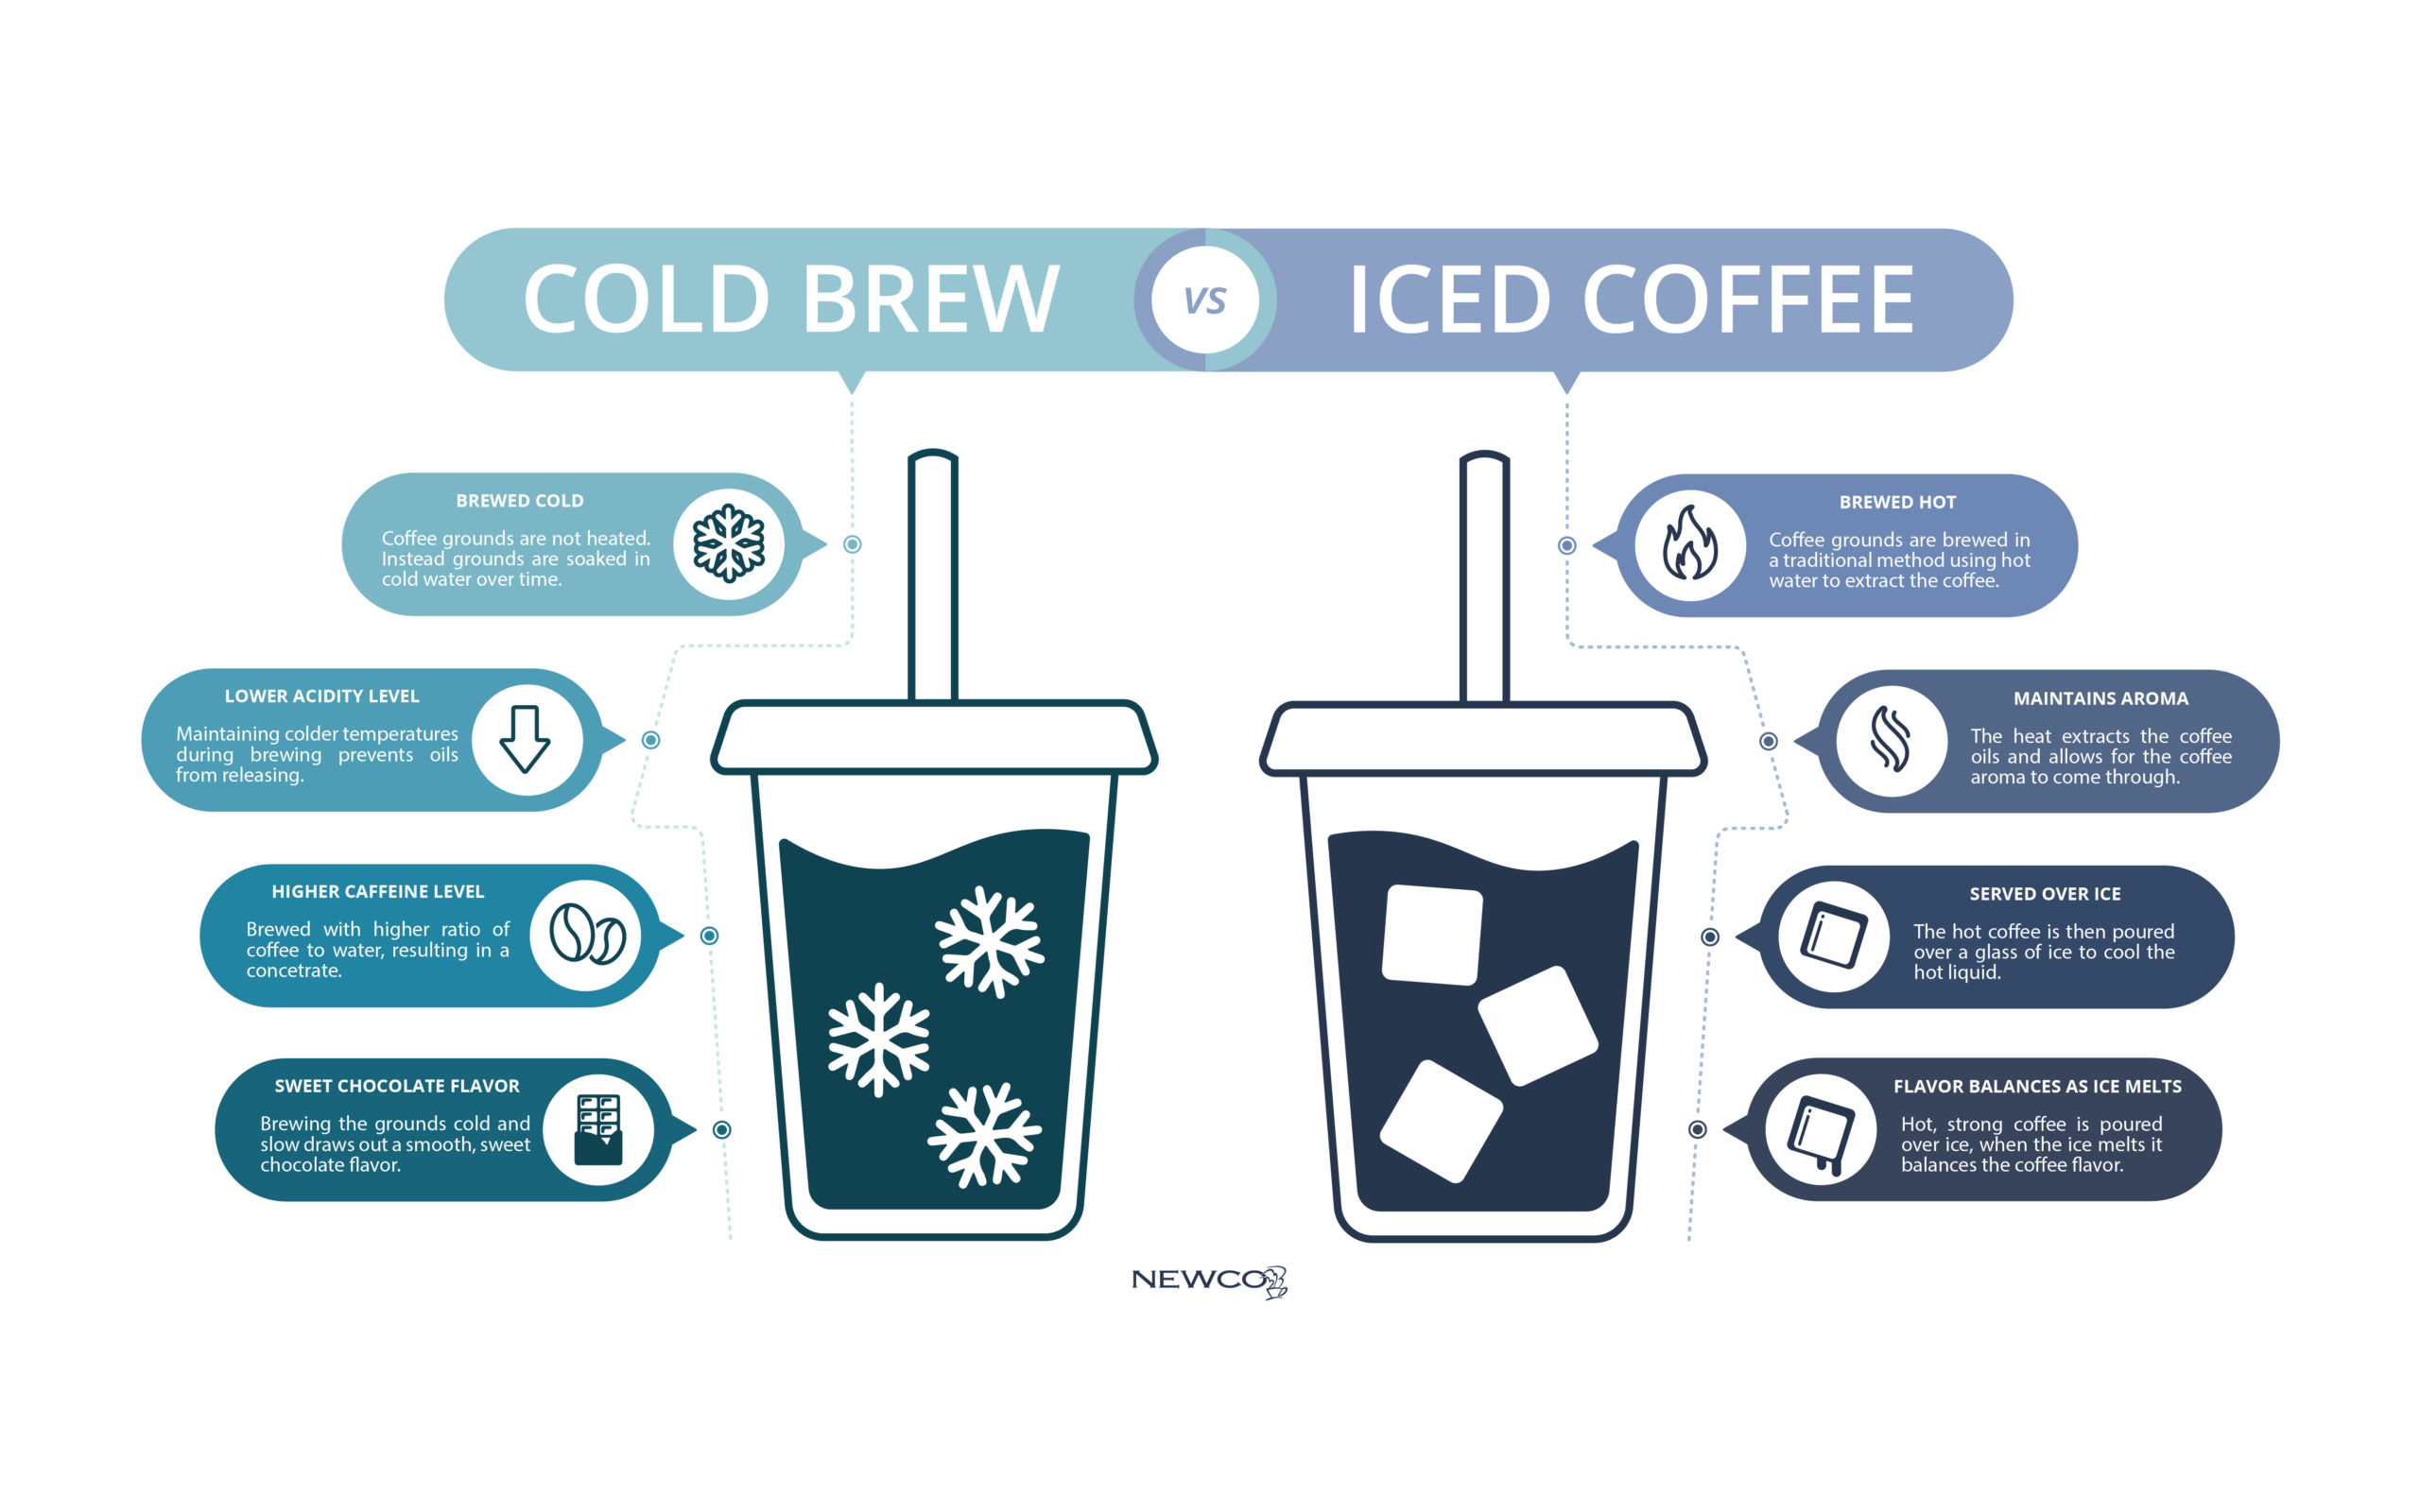 Consumers Demand Cold Coffee